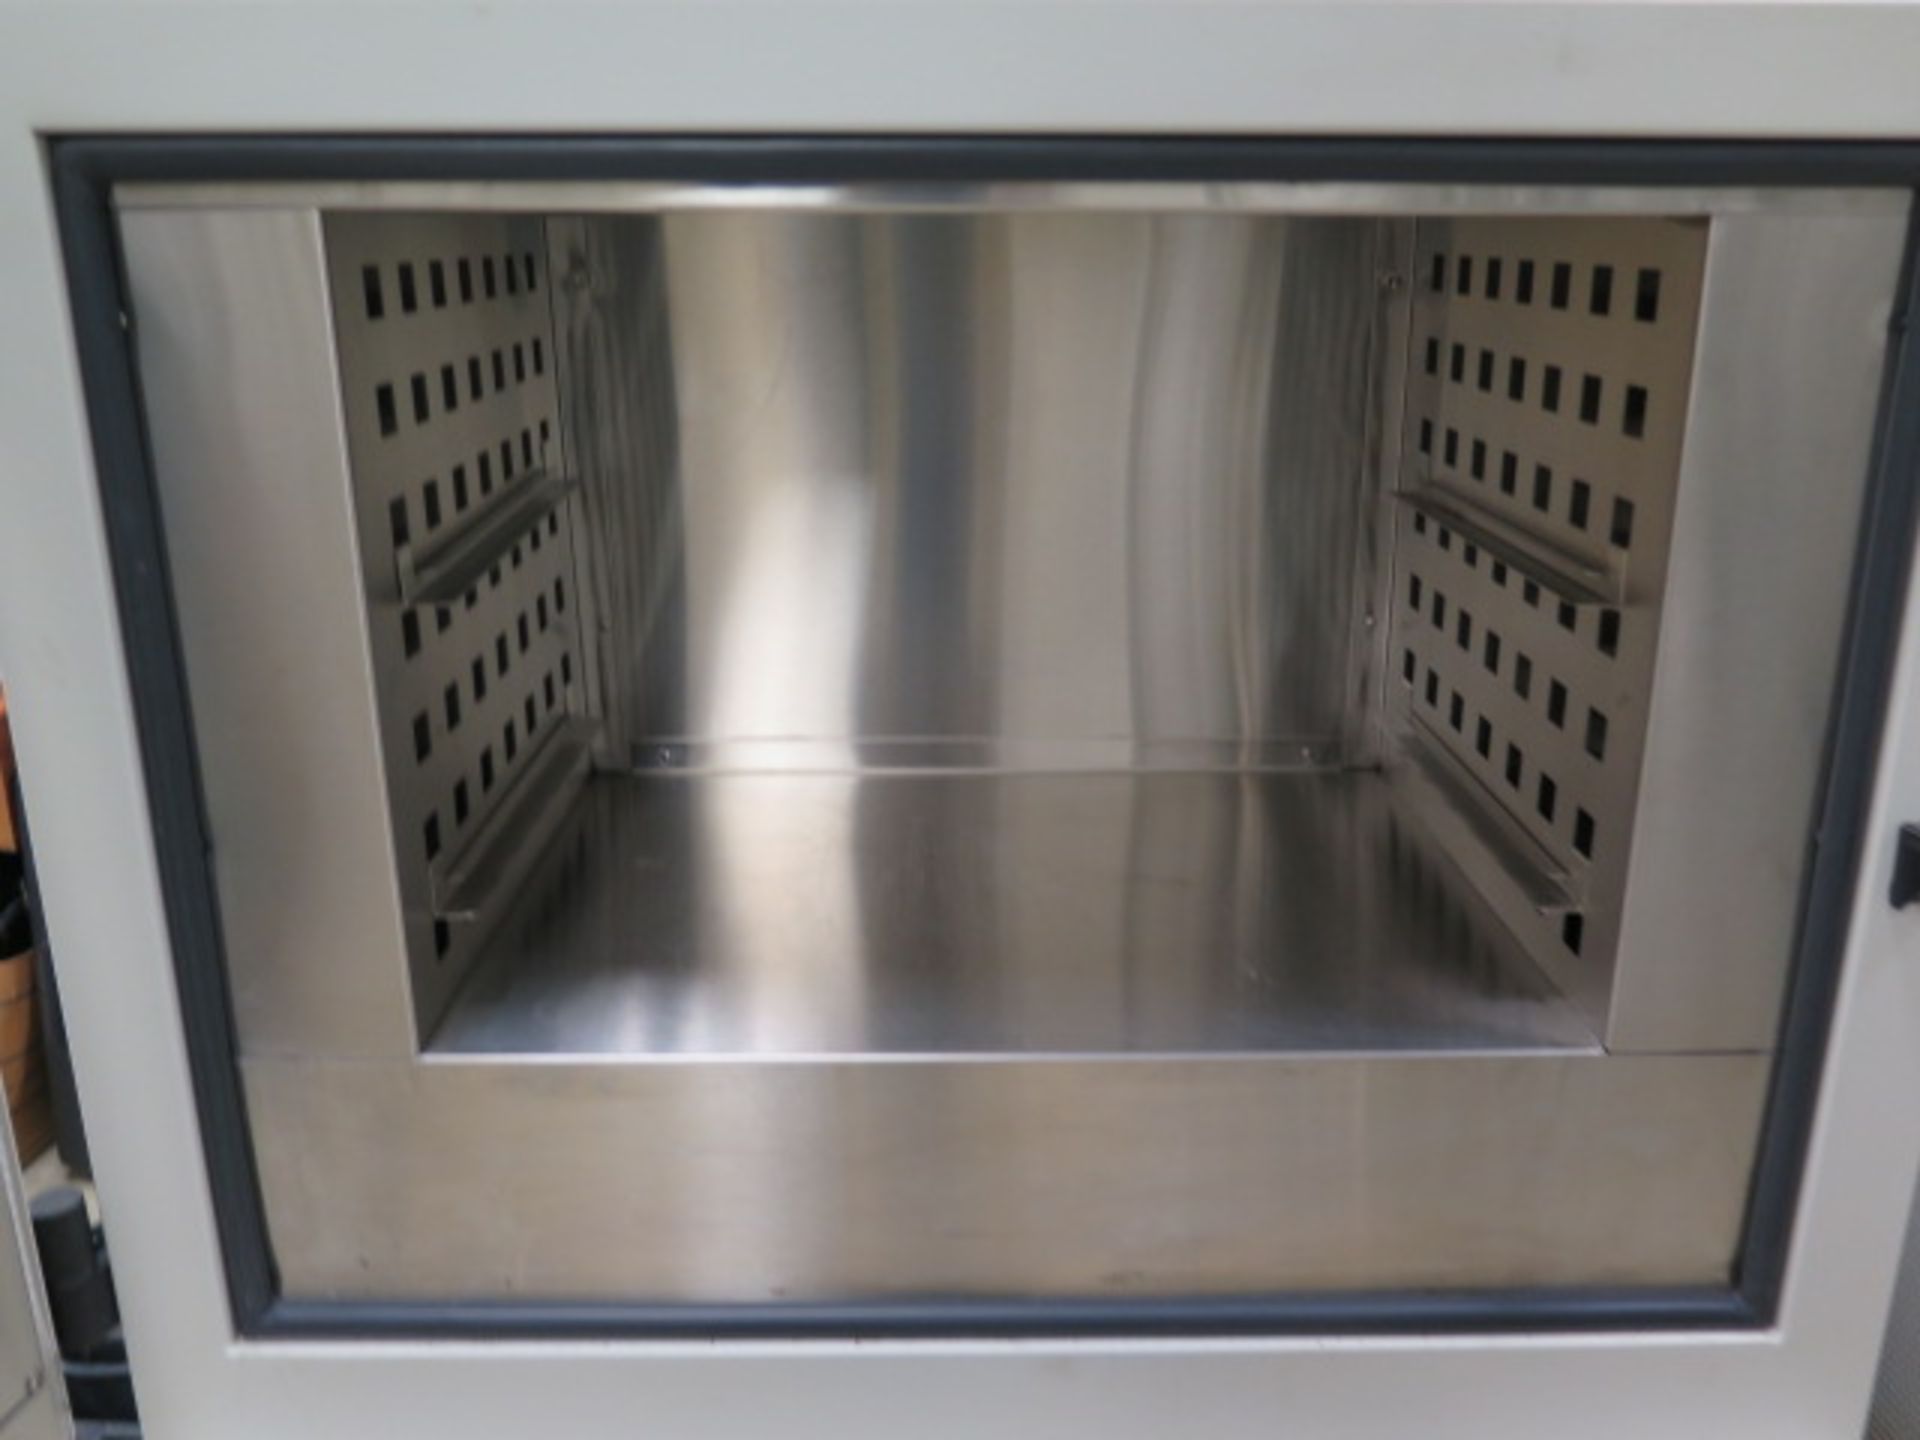 Thermo Electron Lindberg / BlueM mdl. MO1440A-1 Oven s/n Z15R-509008-ZR 300 Degrees C, SOLD AS IS - Image 3 of 8